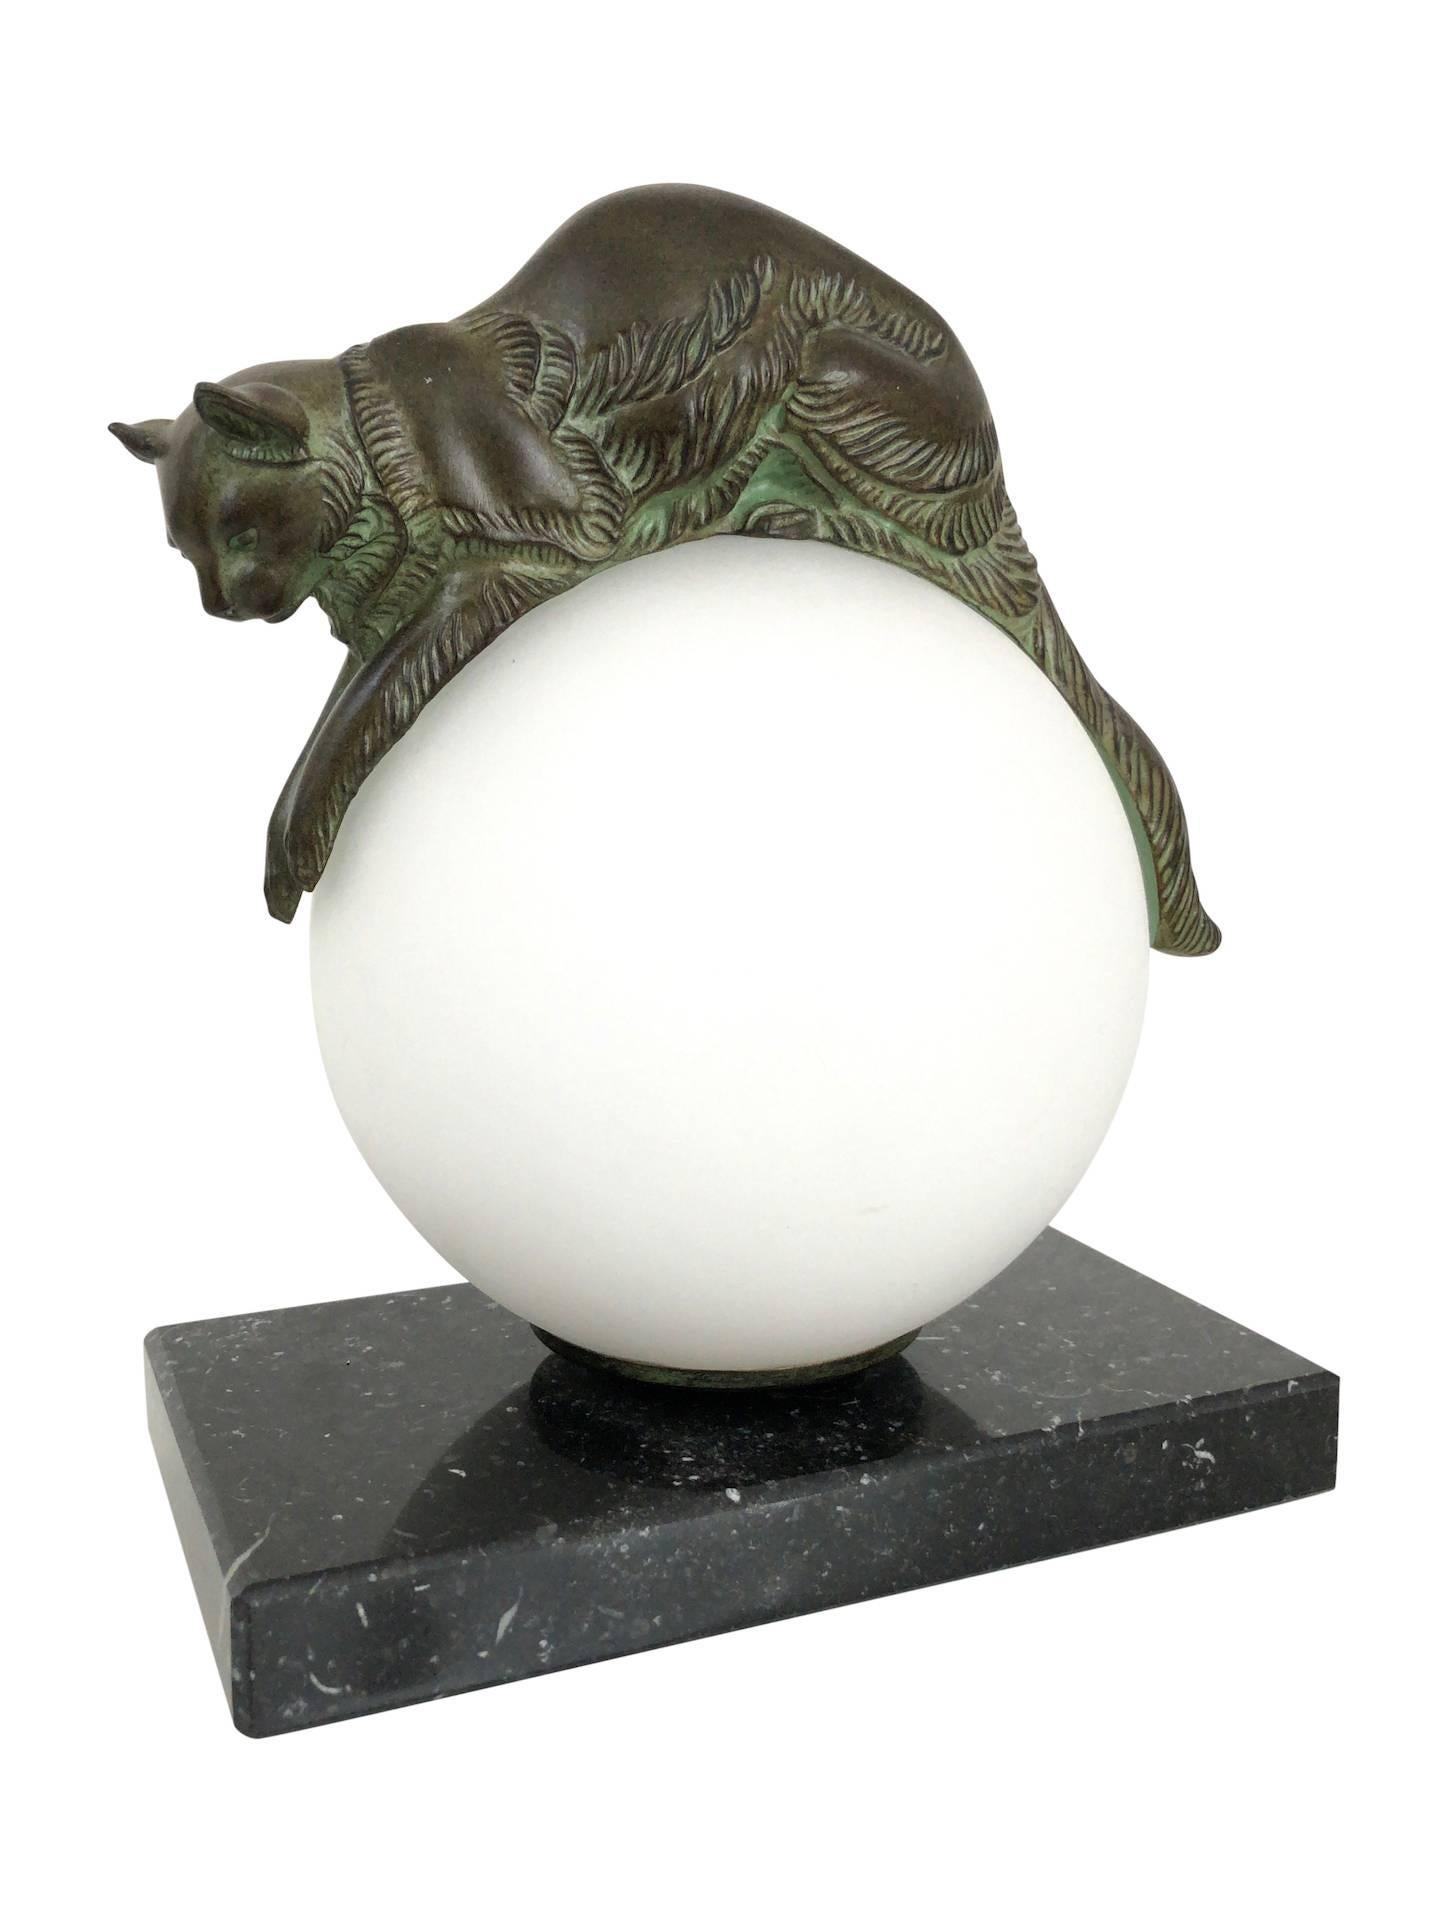 “Équilibré” (French: balanced) 
Cat keeps balance on a lighted glass ball 
Designed in France during the roaring 1920s by “Gaillard”, signed 
Original “Max Le Verrier”, stamped 
Art Deco style, France.

Handmade sculpture made in “Régule” (spelter /